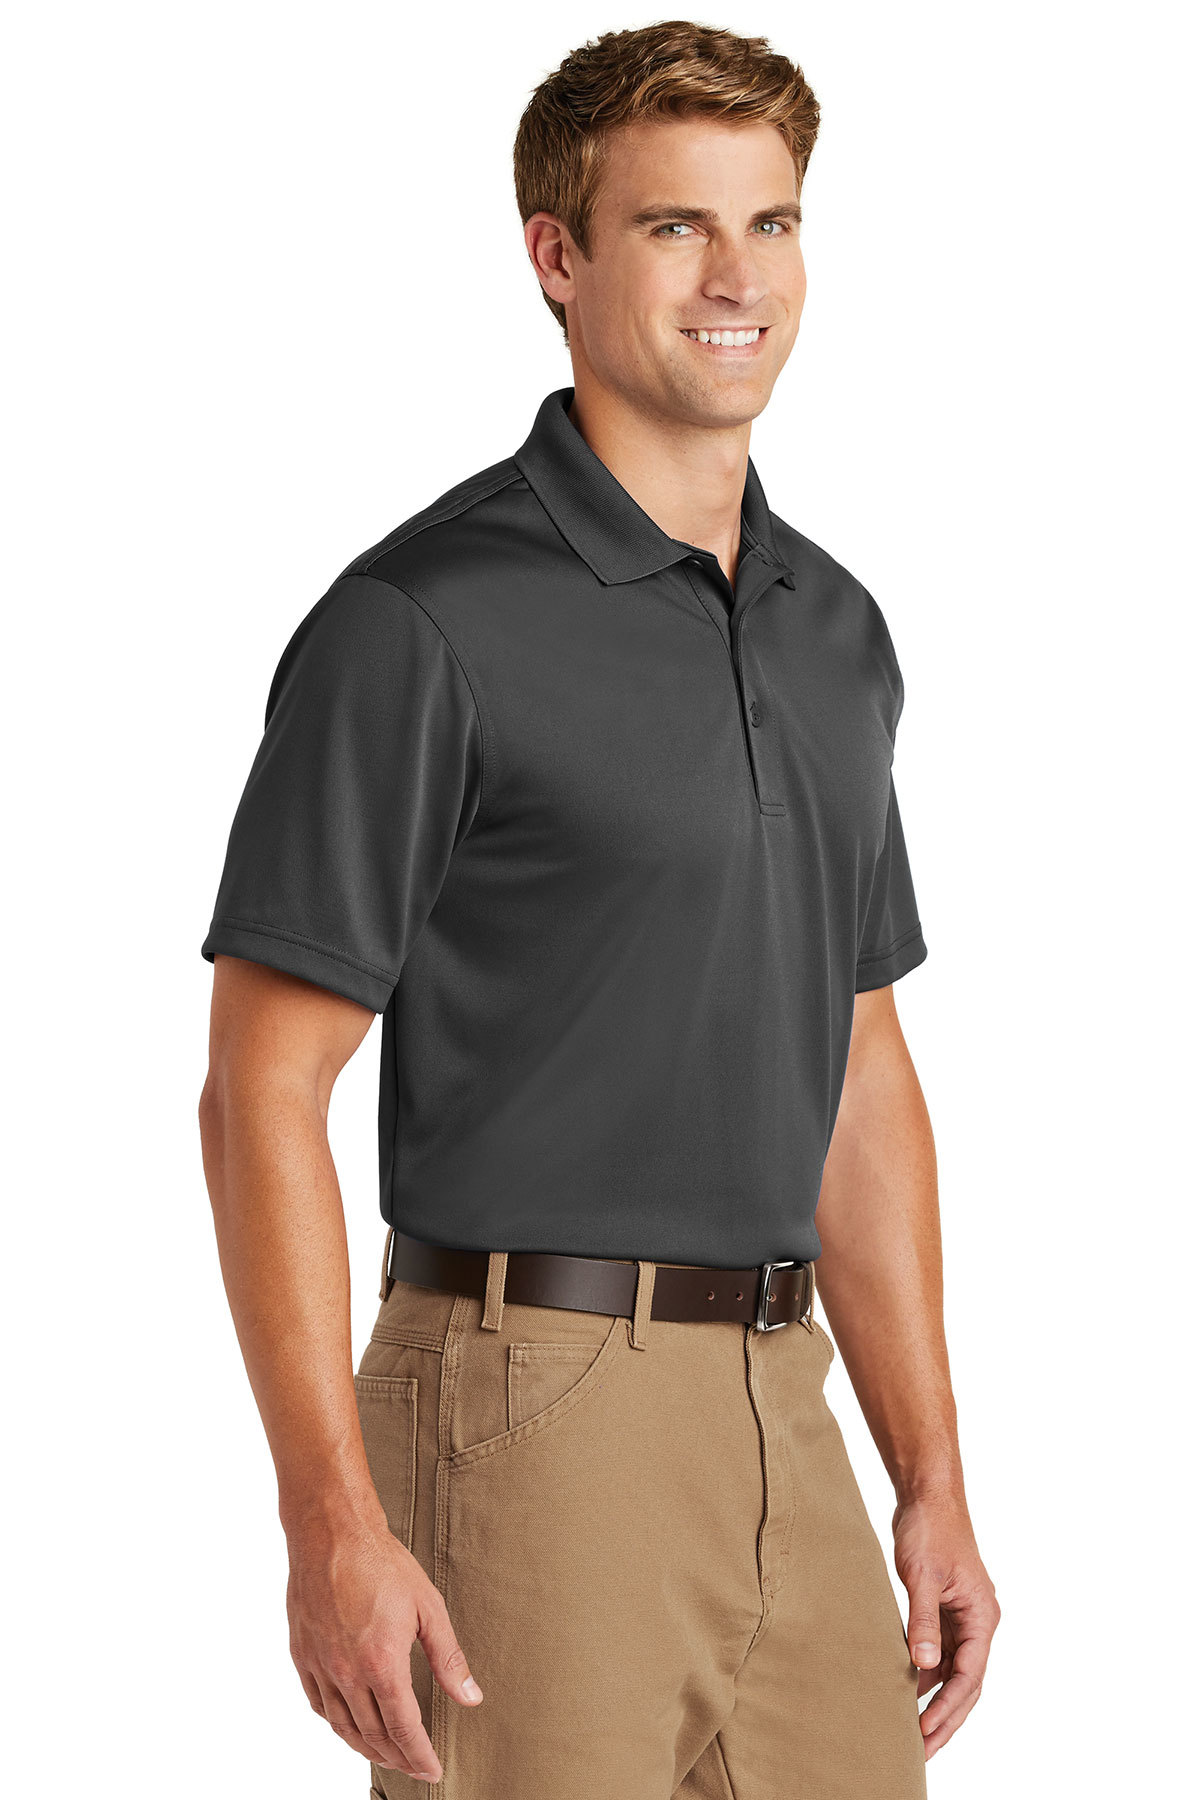 CornerStone Tall Select Snag-Proof Polo | Product | Company Casuals